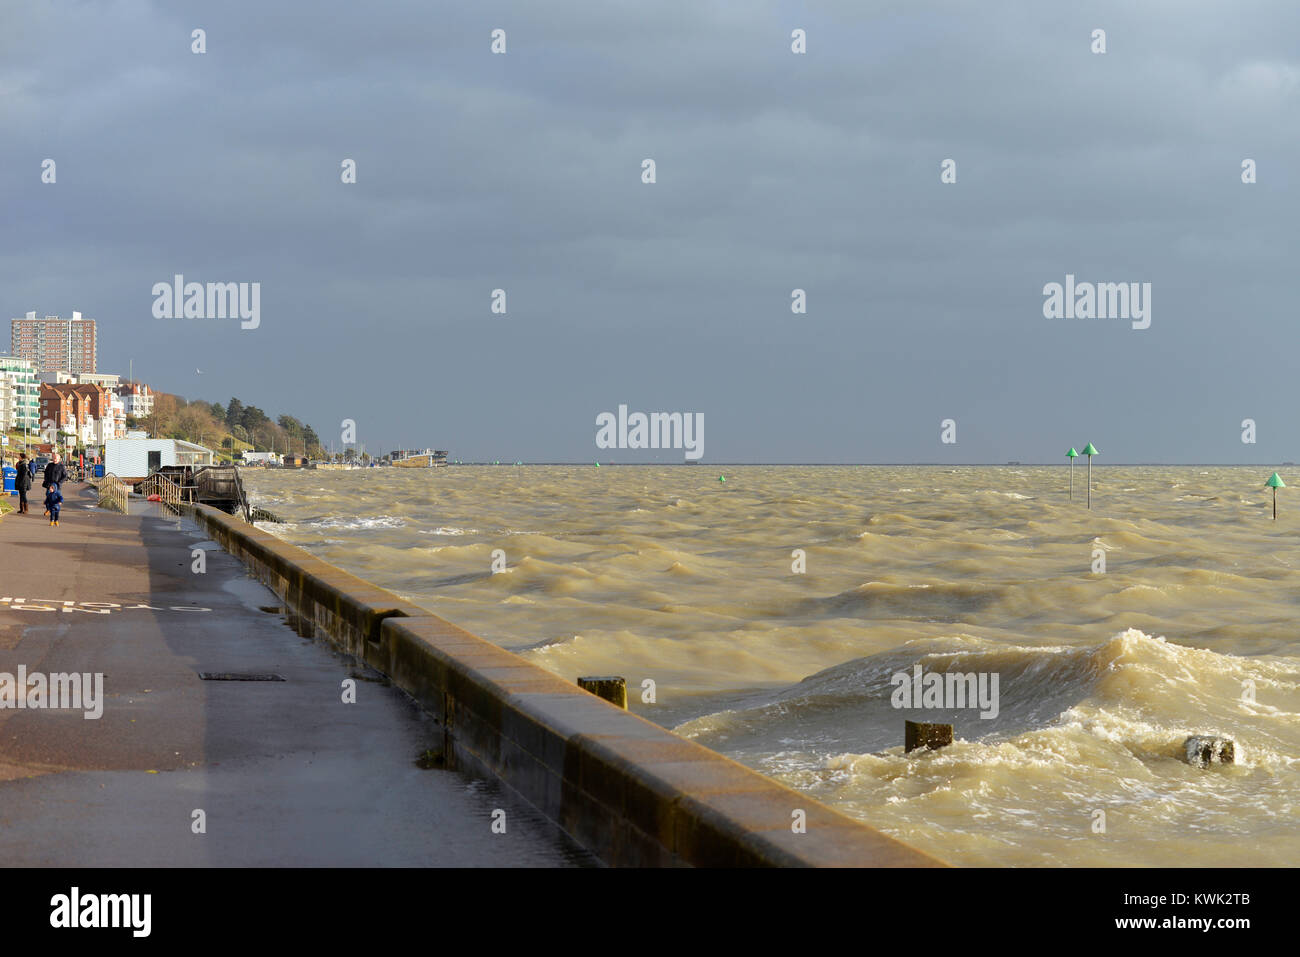 Family walking along the seafront during Storm Eleanor at Southend on Sea, Essex. Stormy waters of Thames Estuary with Southend Pier beyond Stock Photo